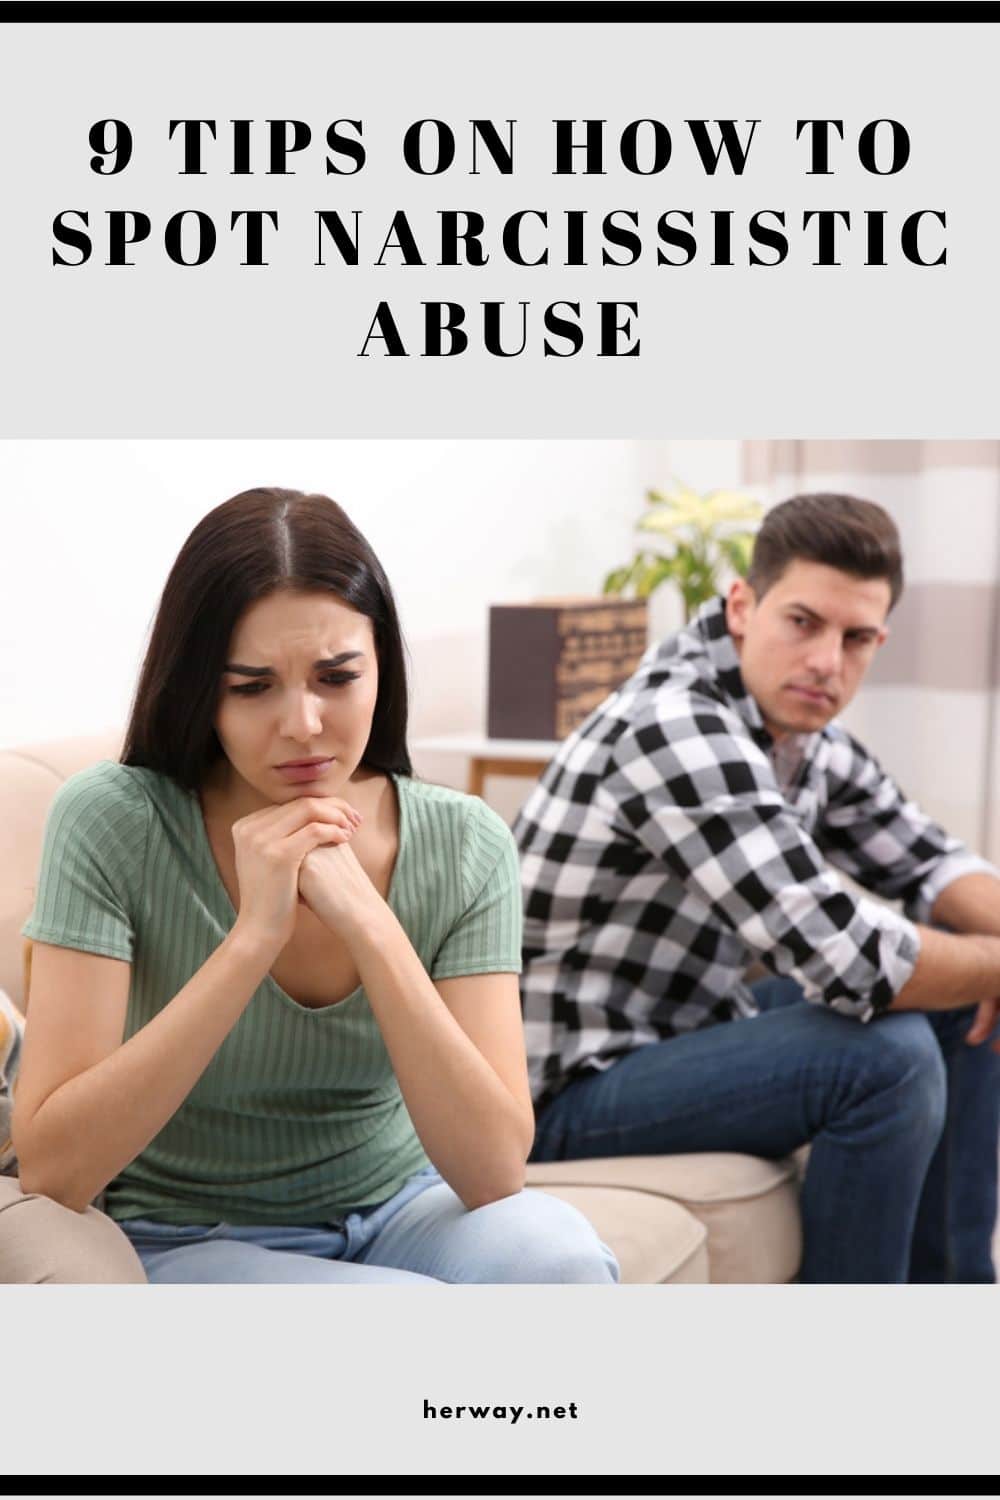 9 Tips On How To Spot Narcissistic Abuse